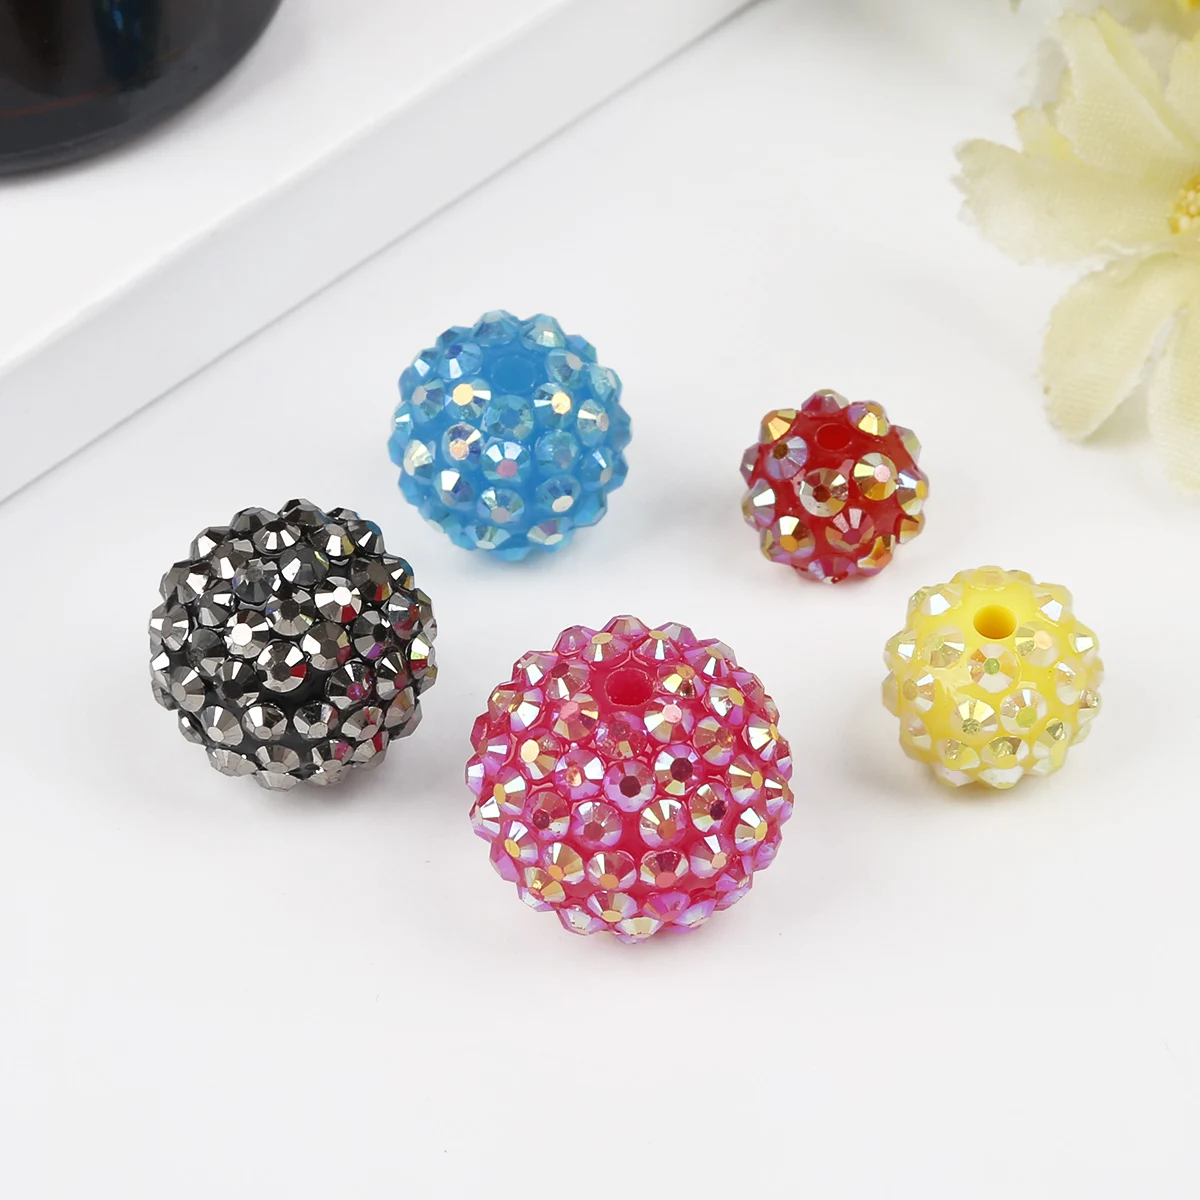 10Pcs Mixed Colours Resin Rhinestones Round Ball Charms Spacer Beads 12MM 14MM 